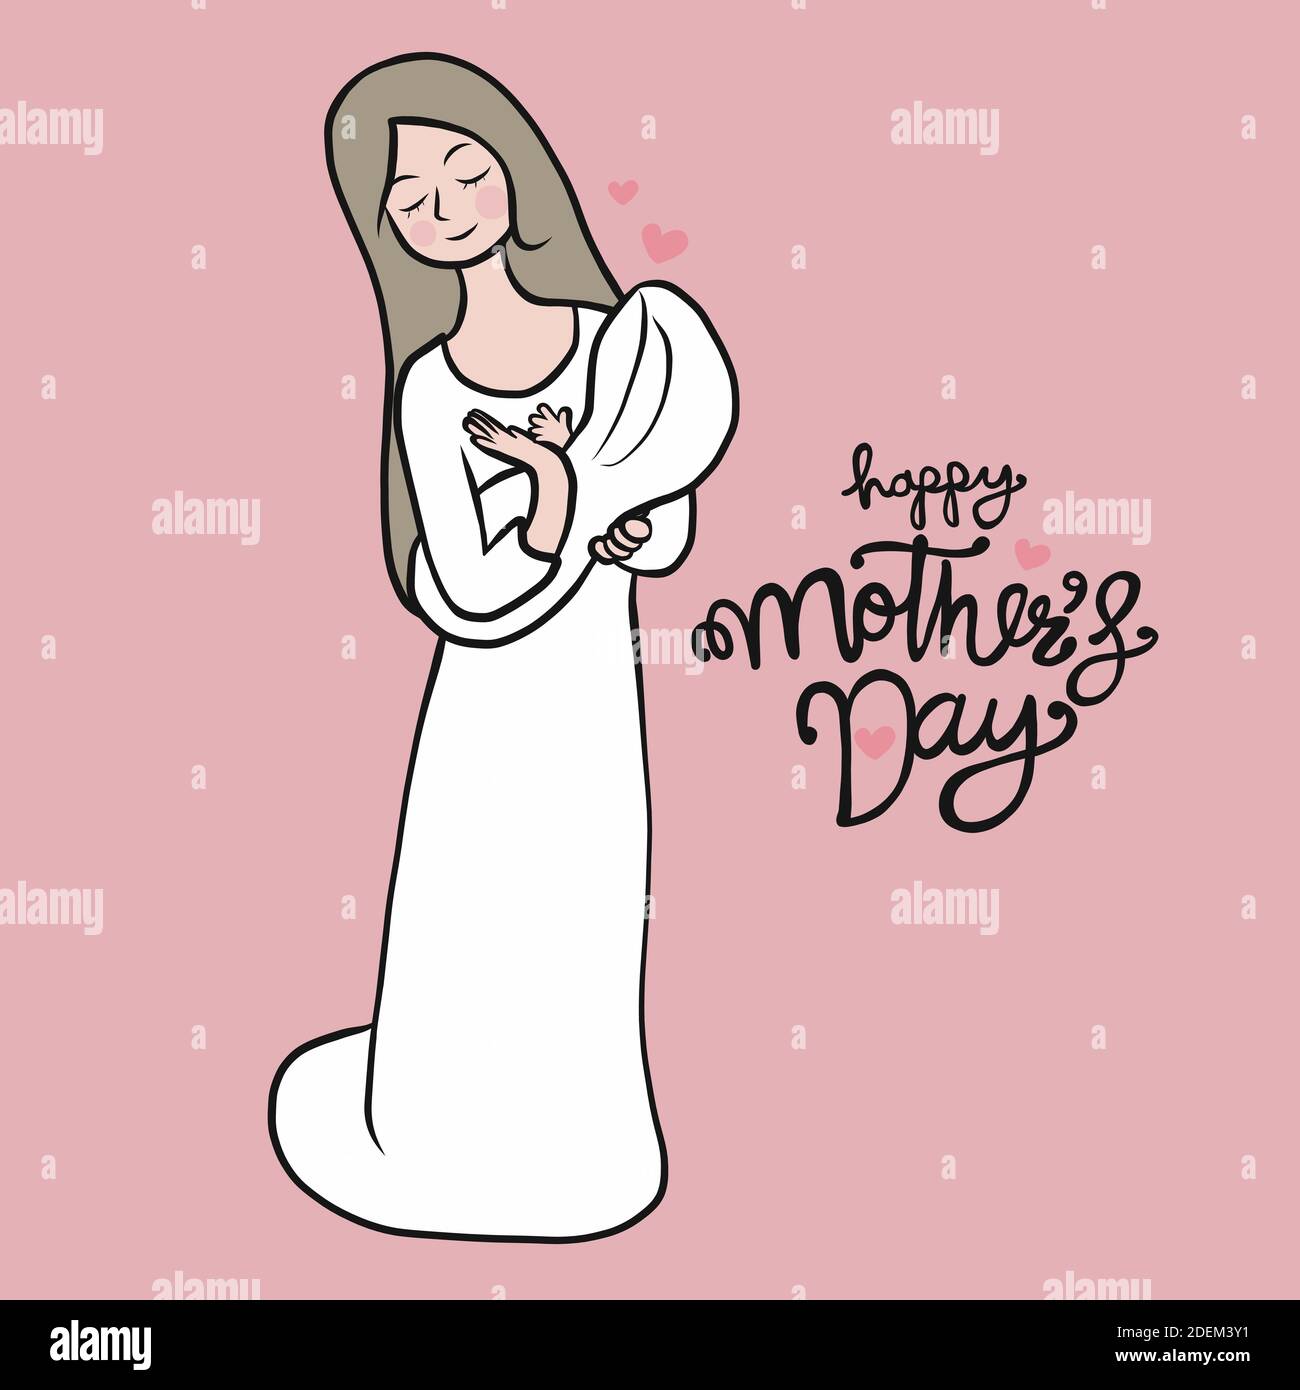 Mom carry baby , Happy Mother's Day cartoon vector illustration Stock Vector